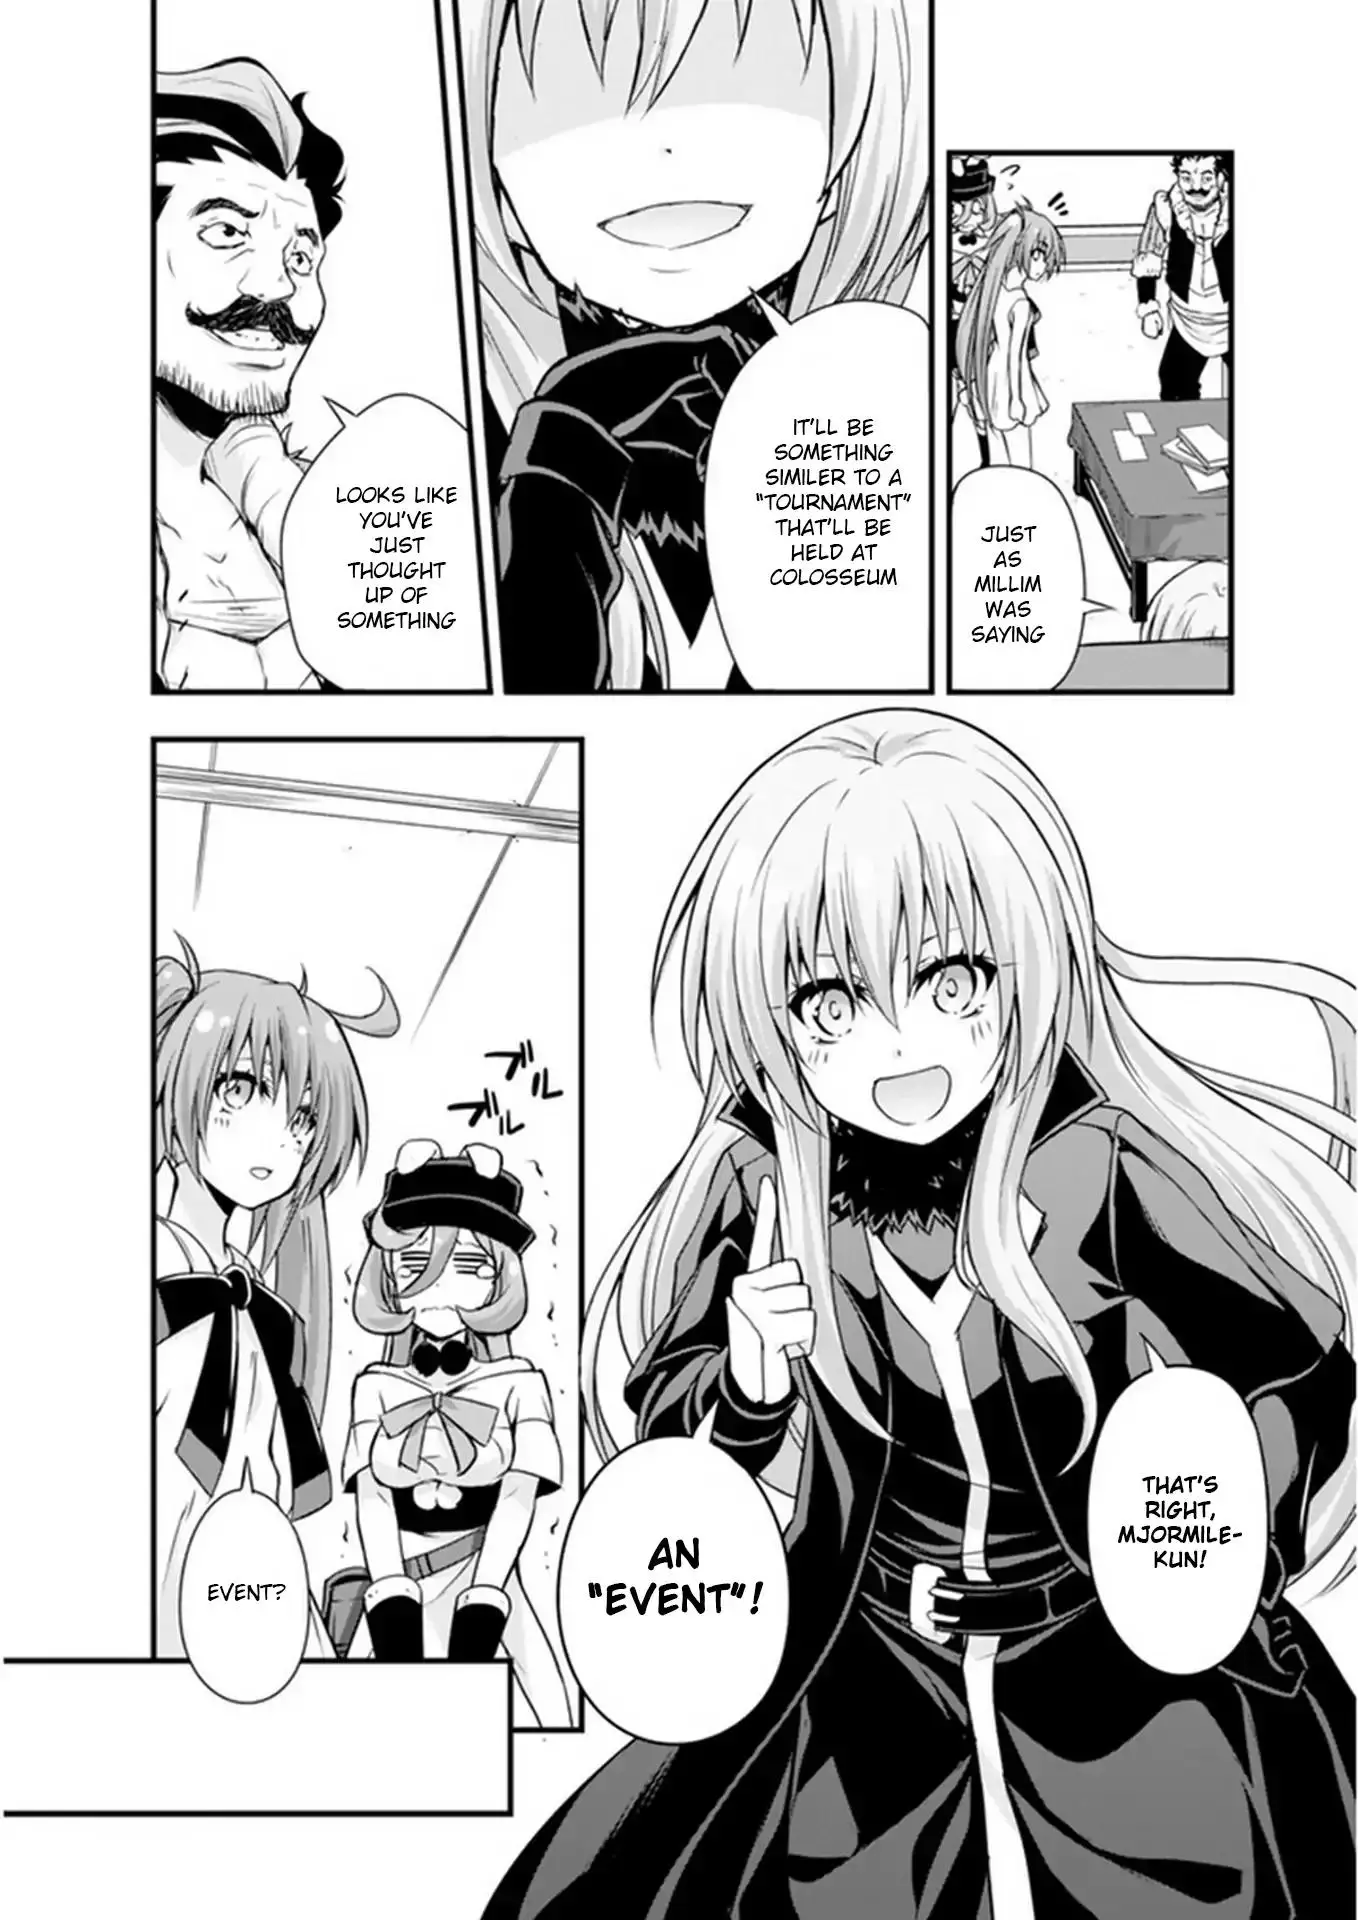 Tensei Shitara Slime Datta Ken: The Ways of Strolling in the Demon Country - 16 page 10